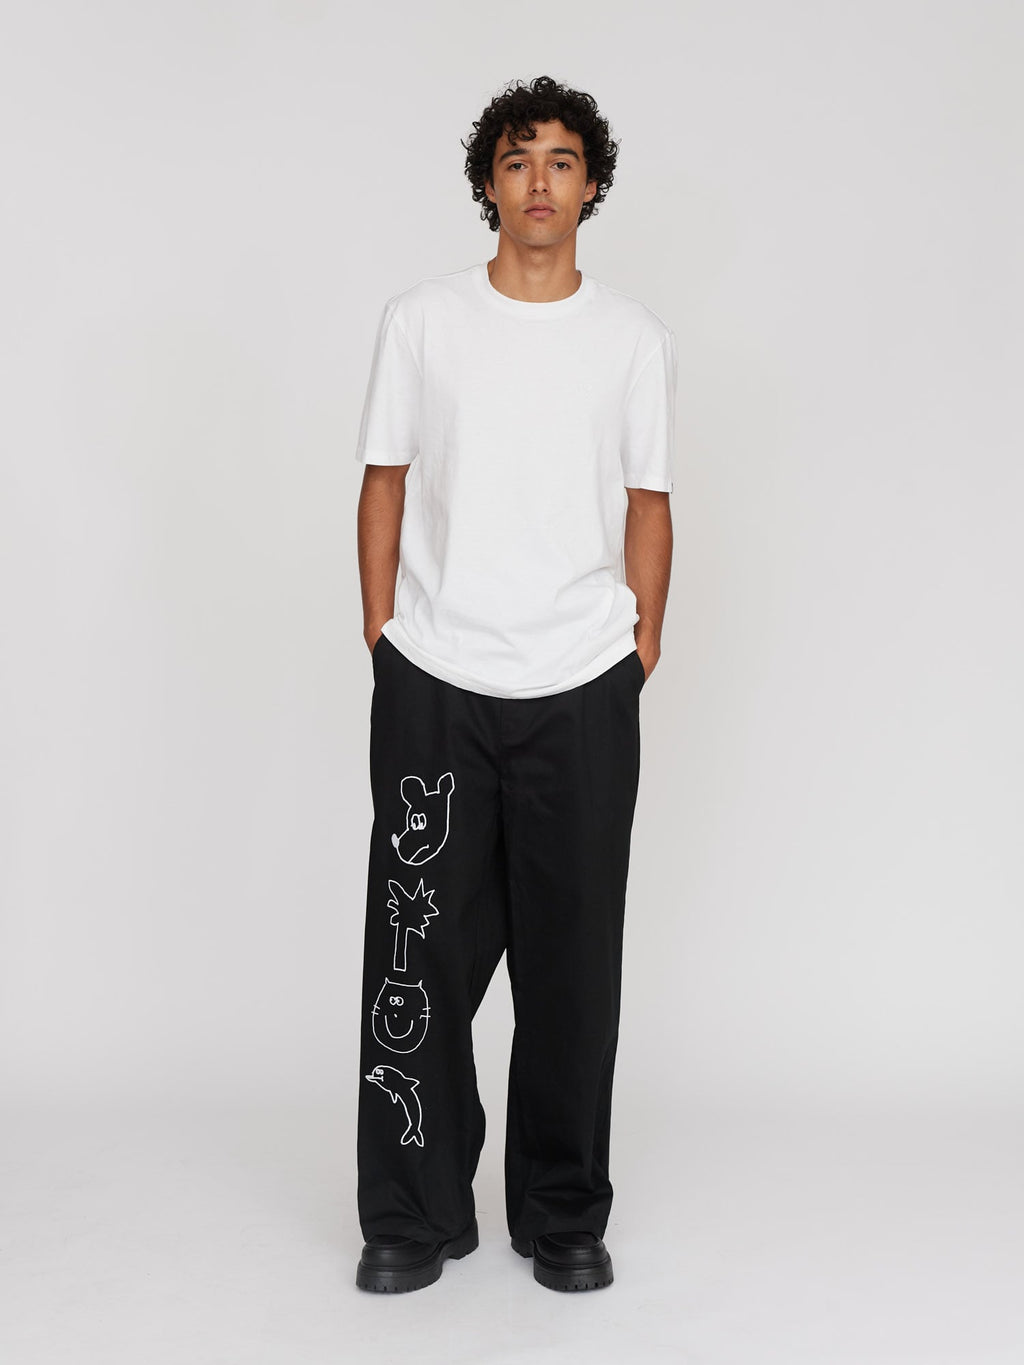 Collection-men-landing, collection-men-new-in-1, collection-men-trousers, model:Fabian wears size M and is 6’0”